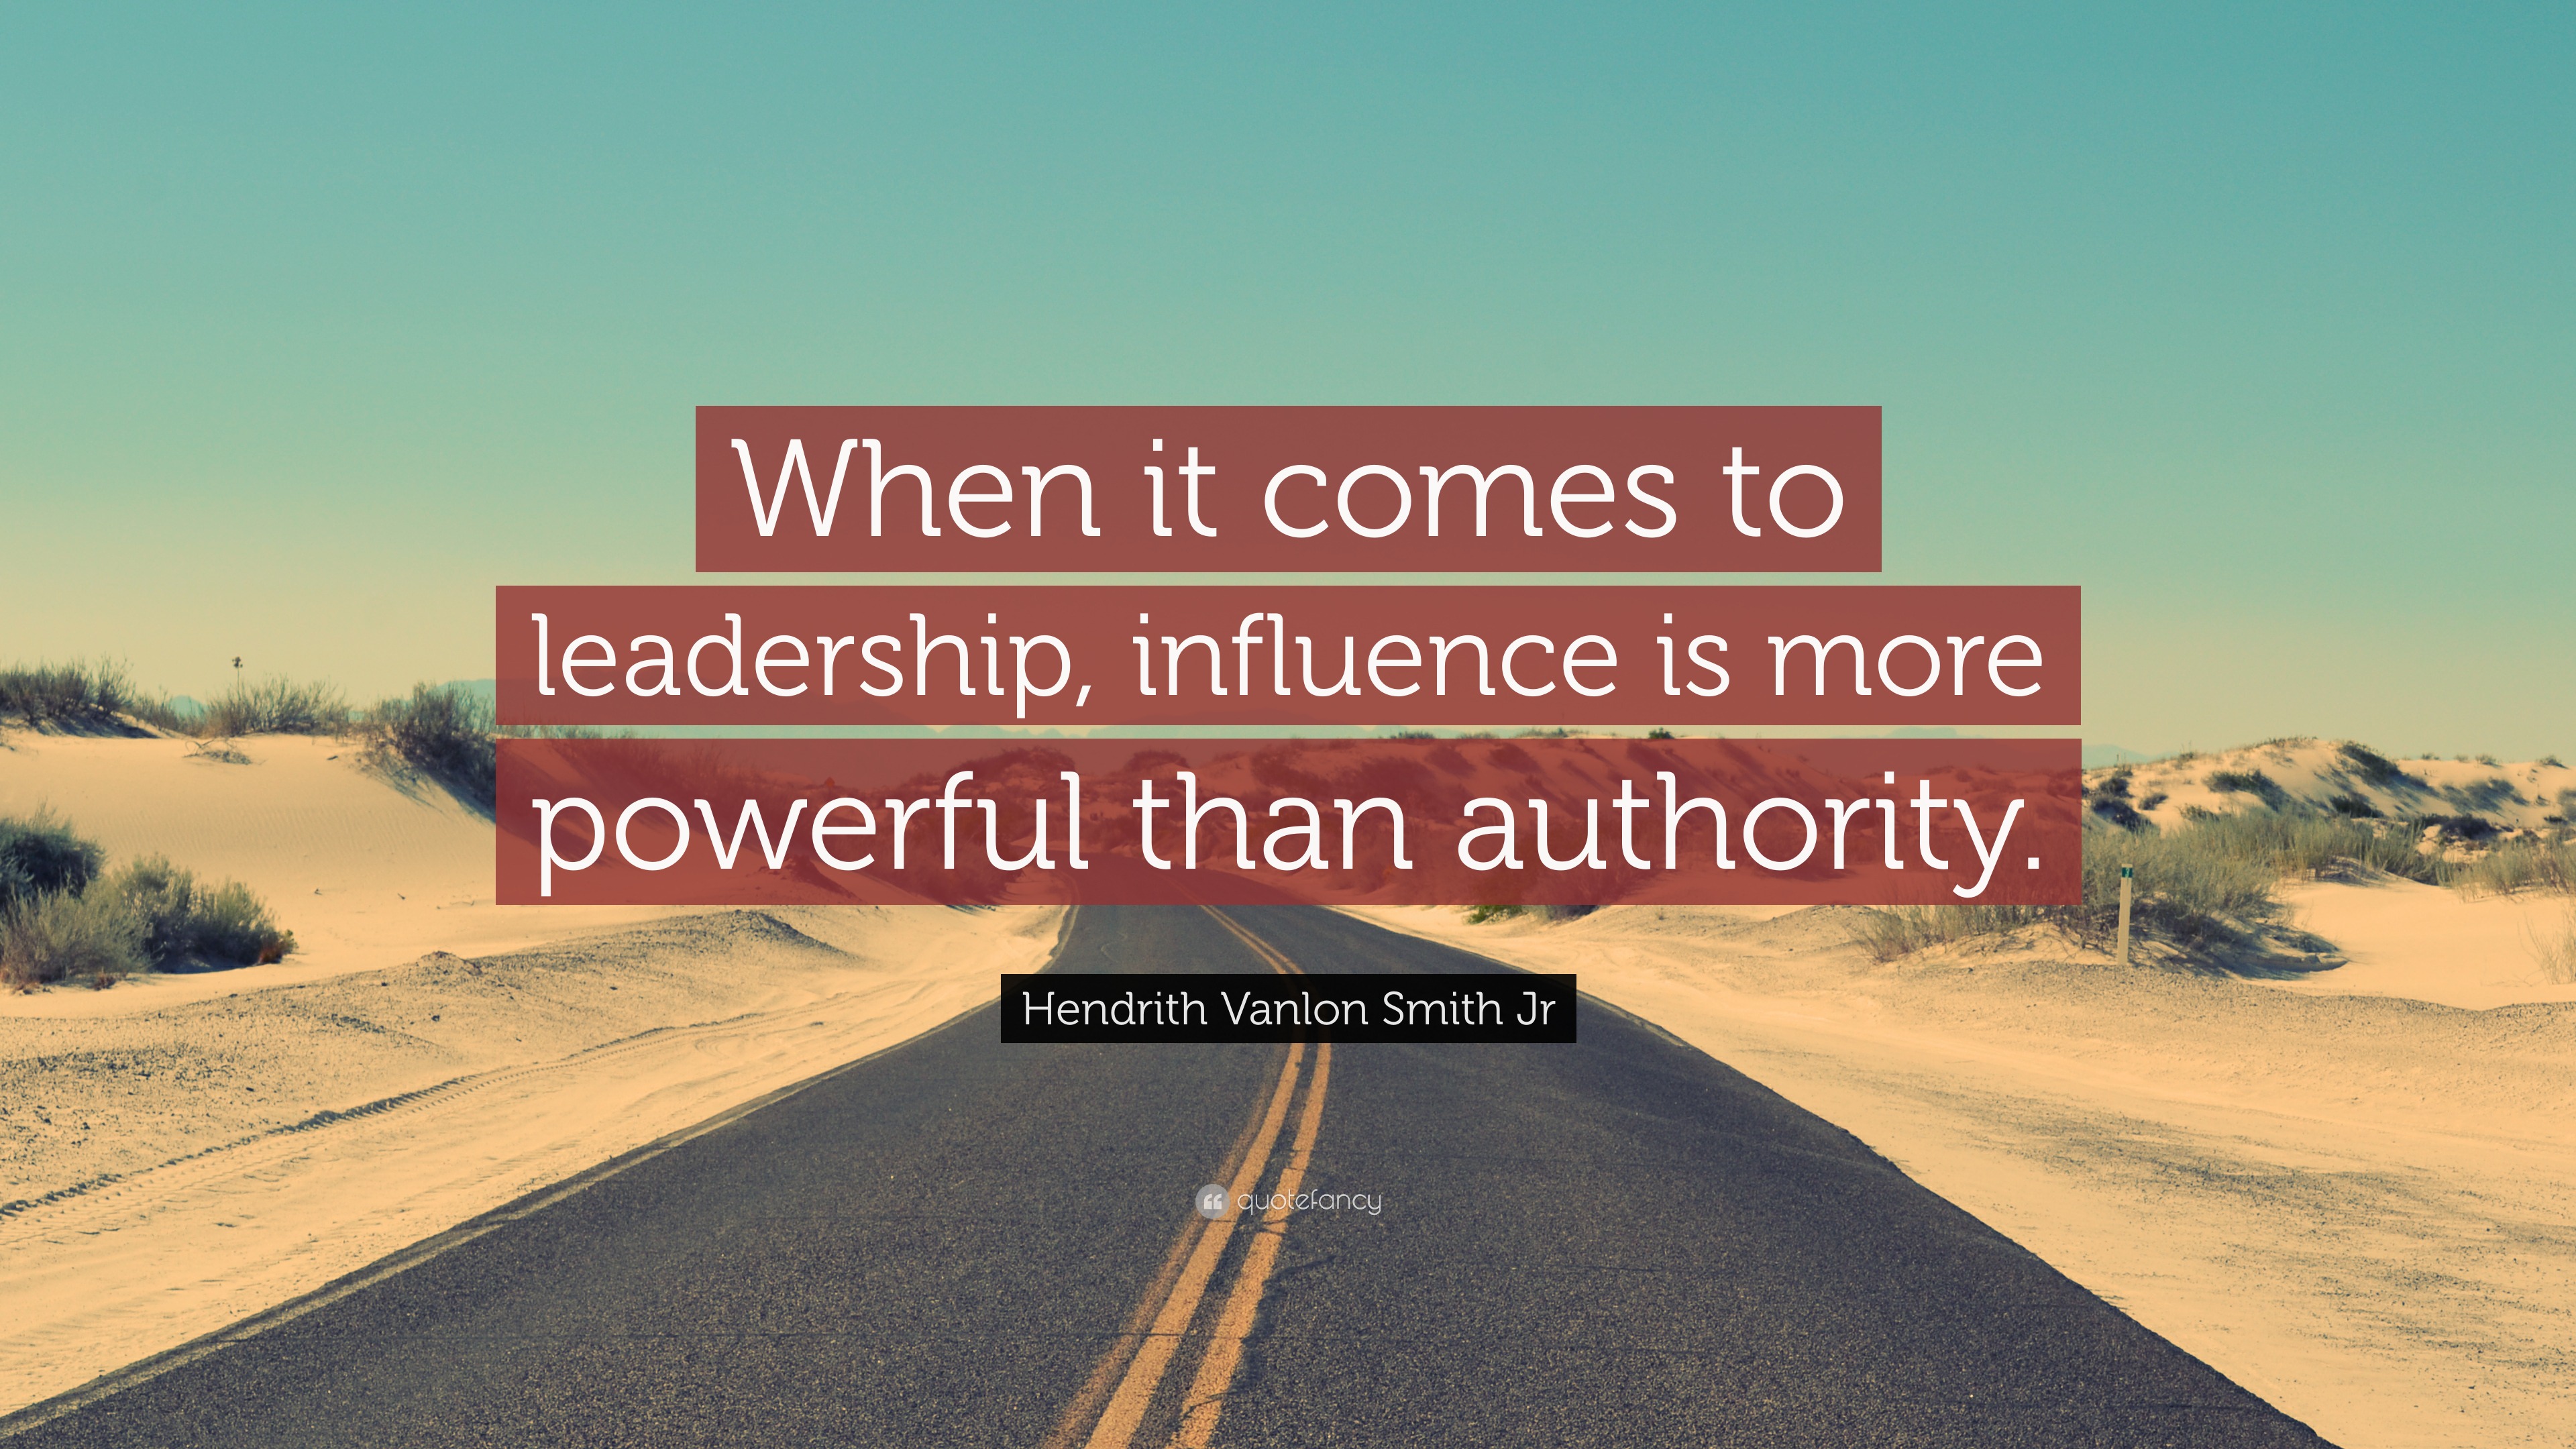 Hendrith Vanlon Smith Jr Quote: “When it comes to leadership, influence ...